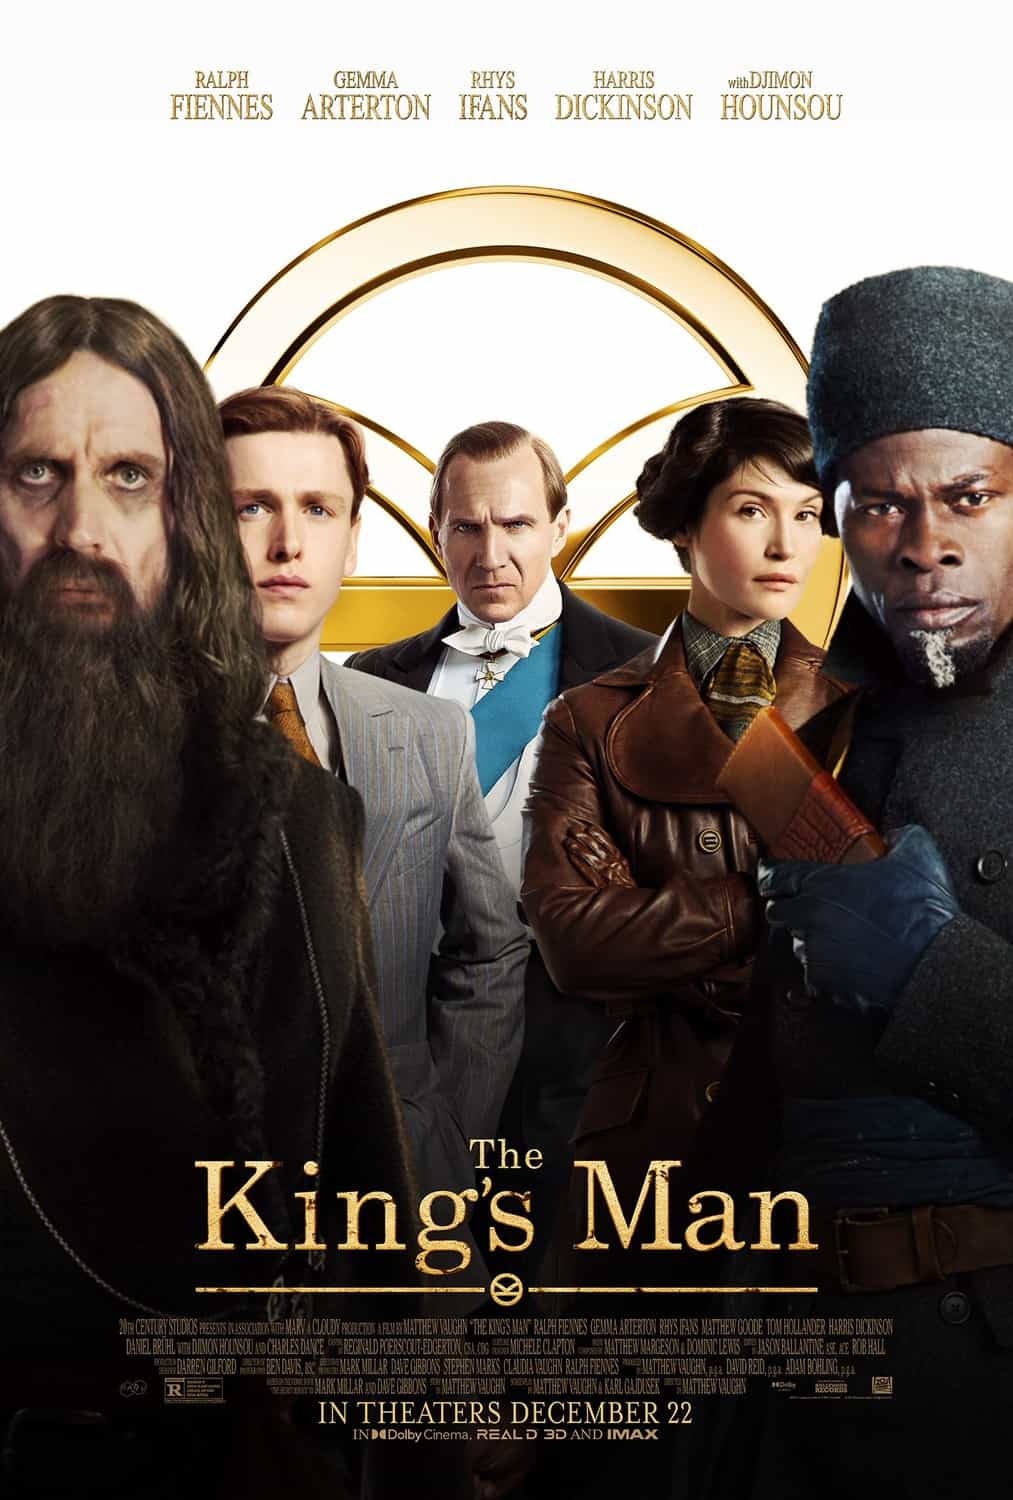 New poster release for The Kings Man starring Ralph Fiennes - movie release date 16th September 2020